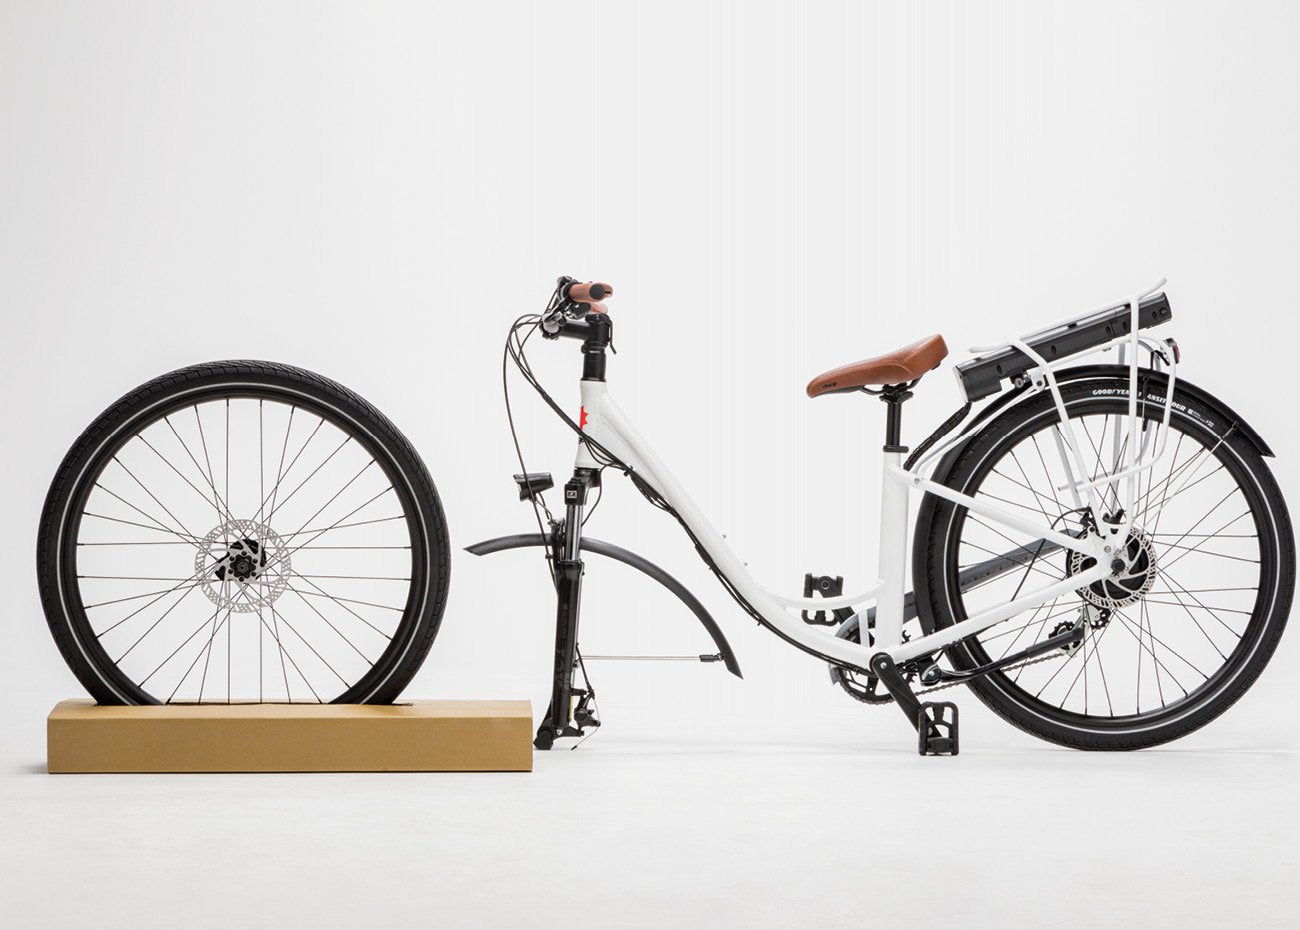 Setup electric bike and wheel for assembly